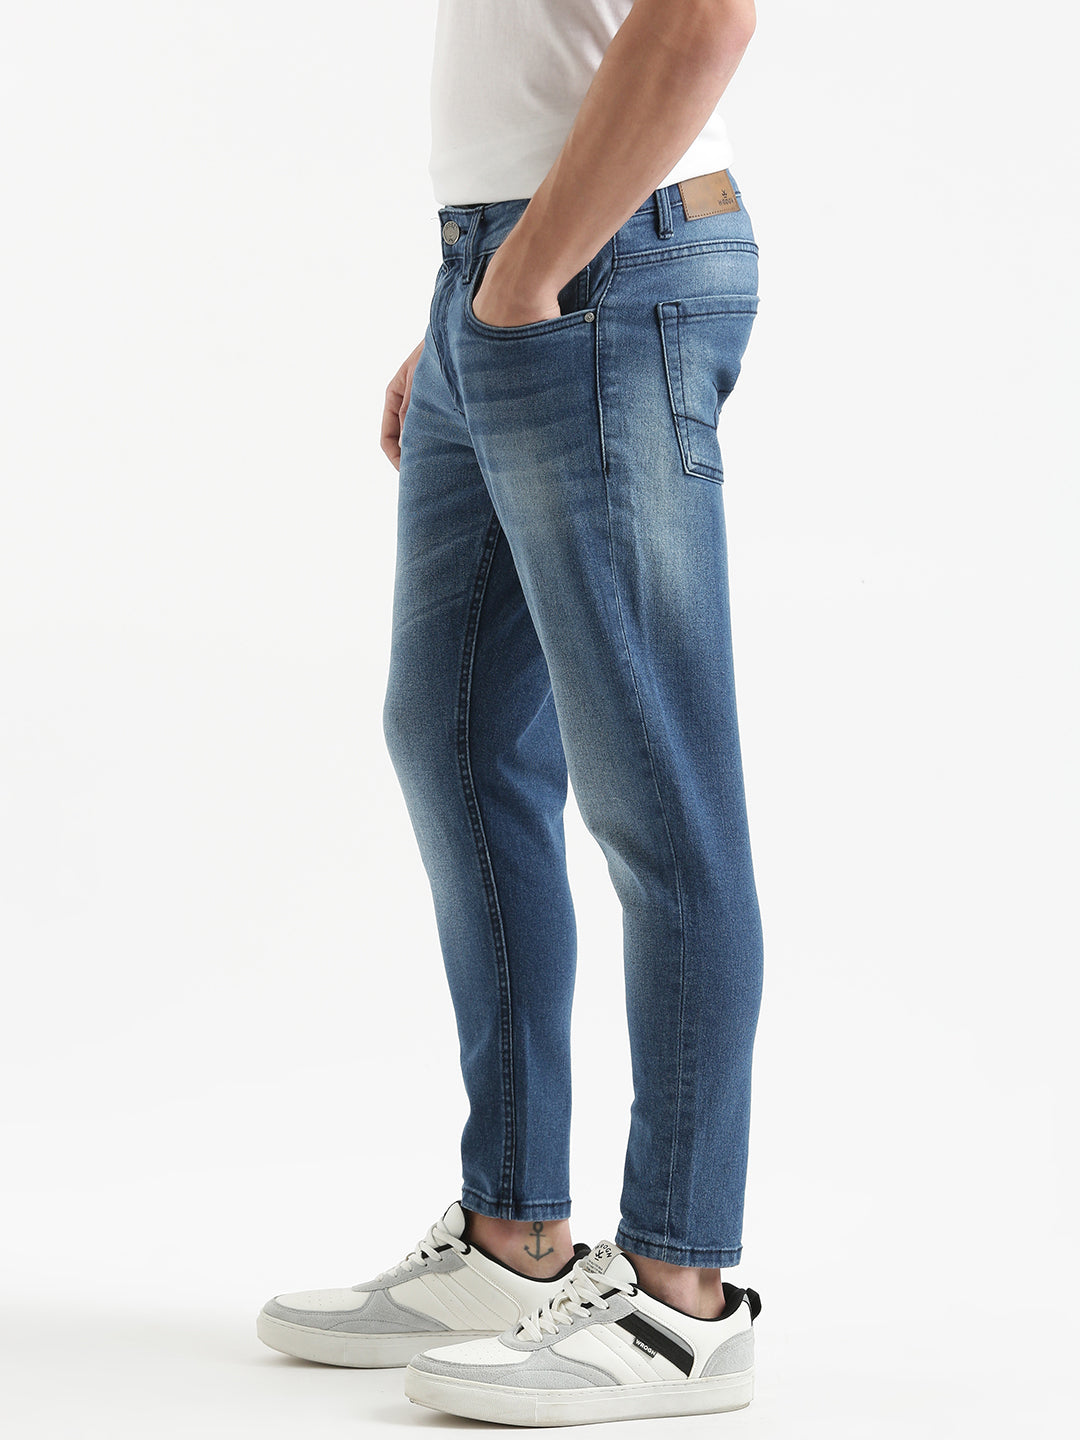 Light Fade Skinny Fit Jeans